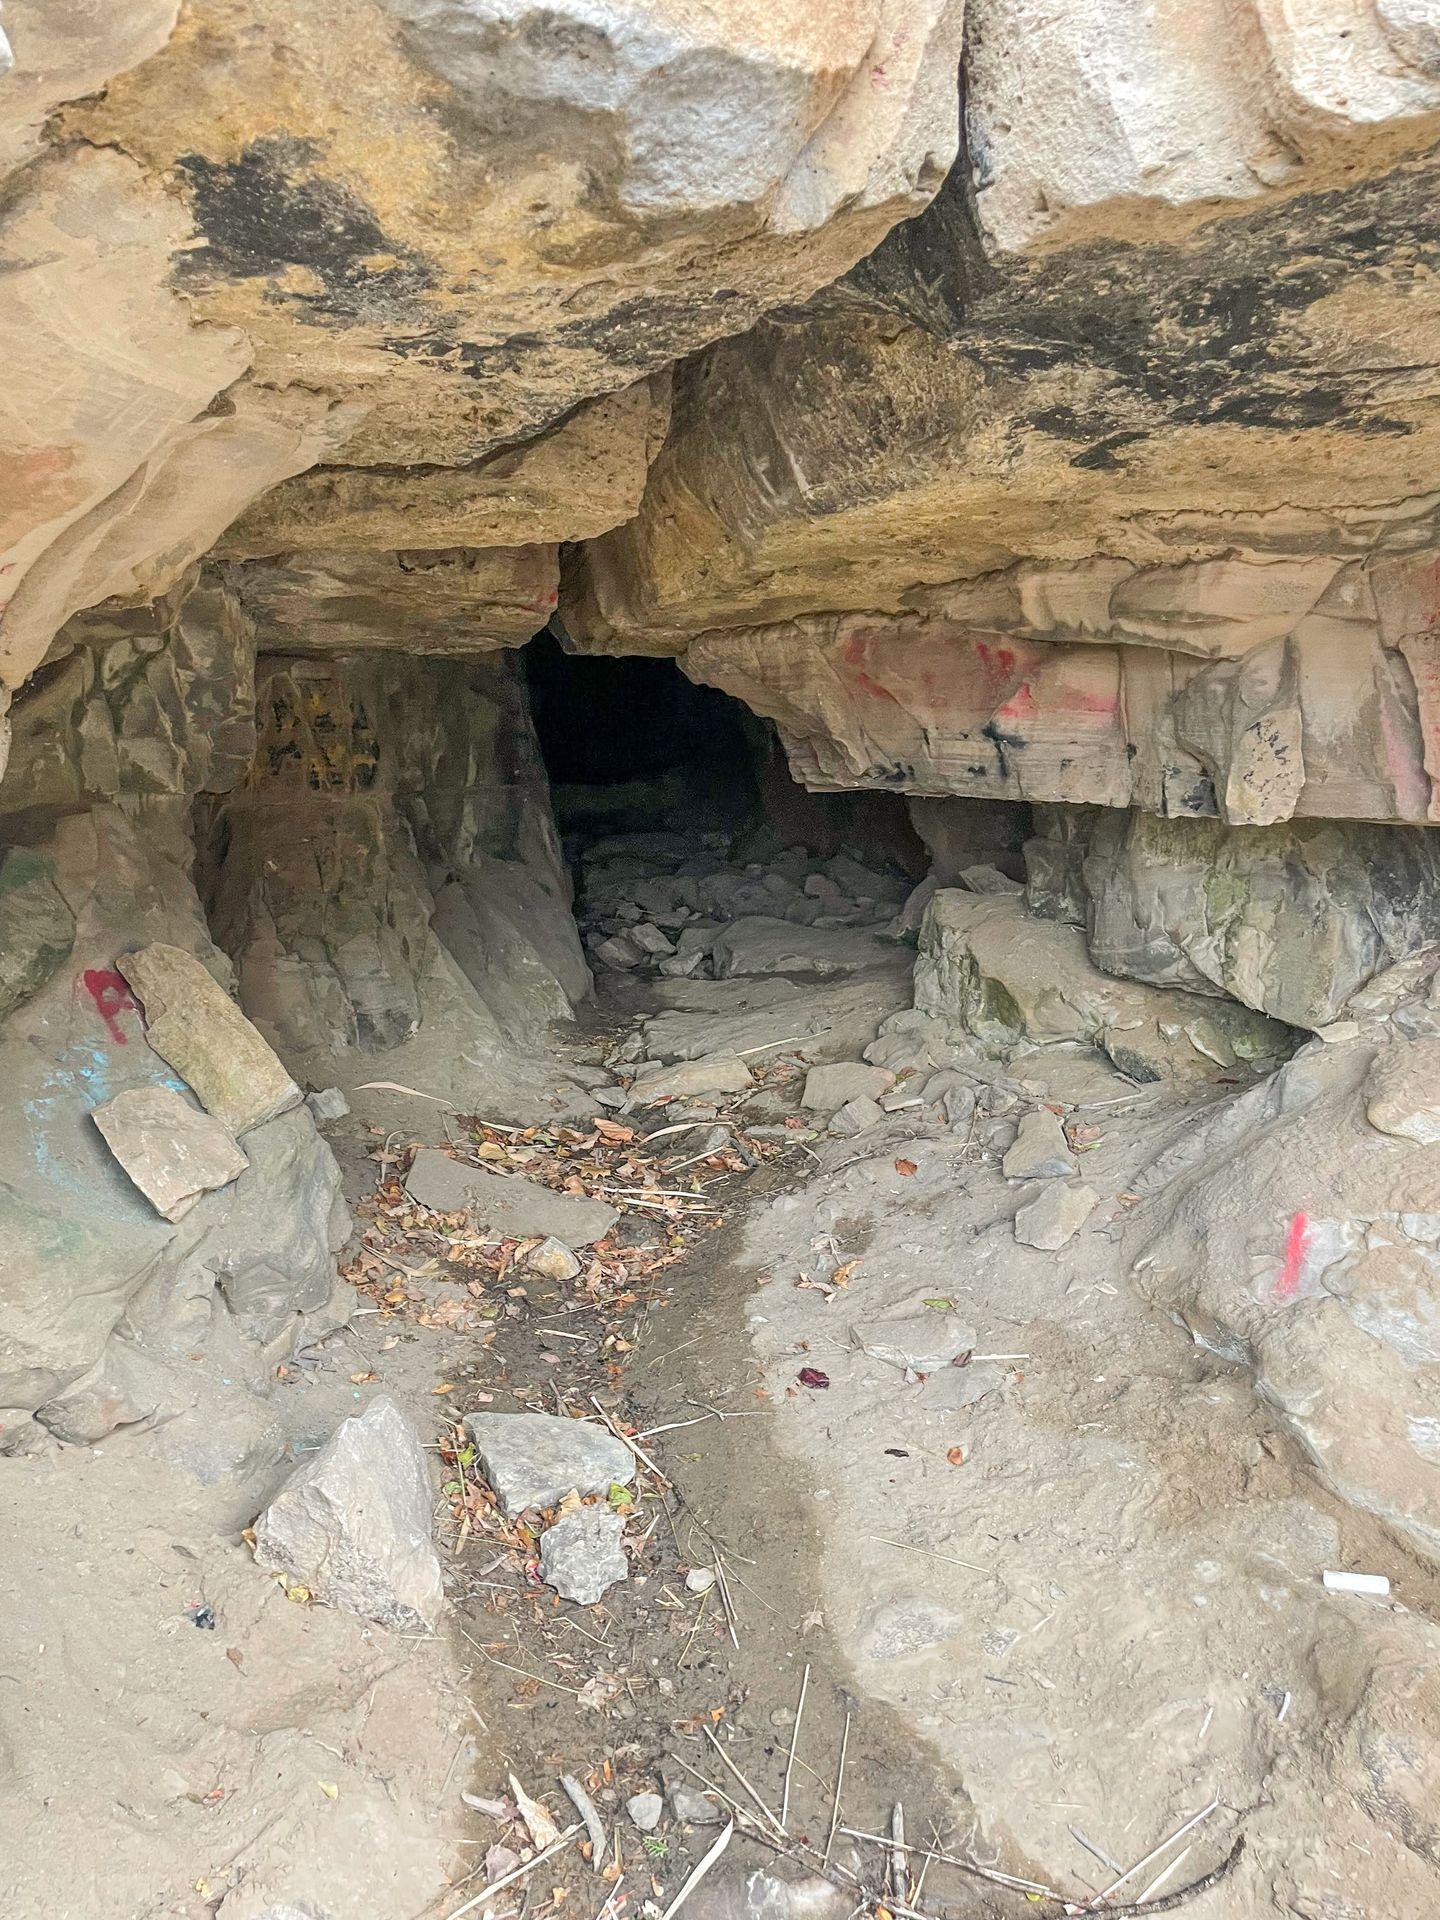 A small cave with a few instances of graffiti on the rocks.